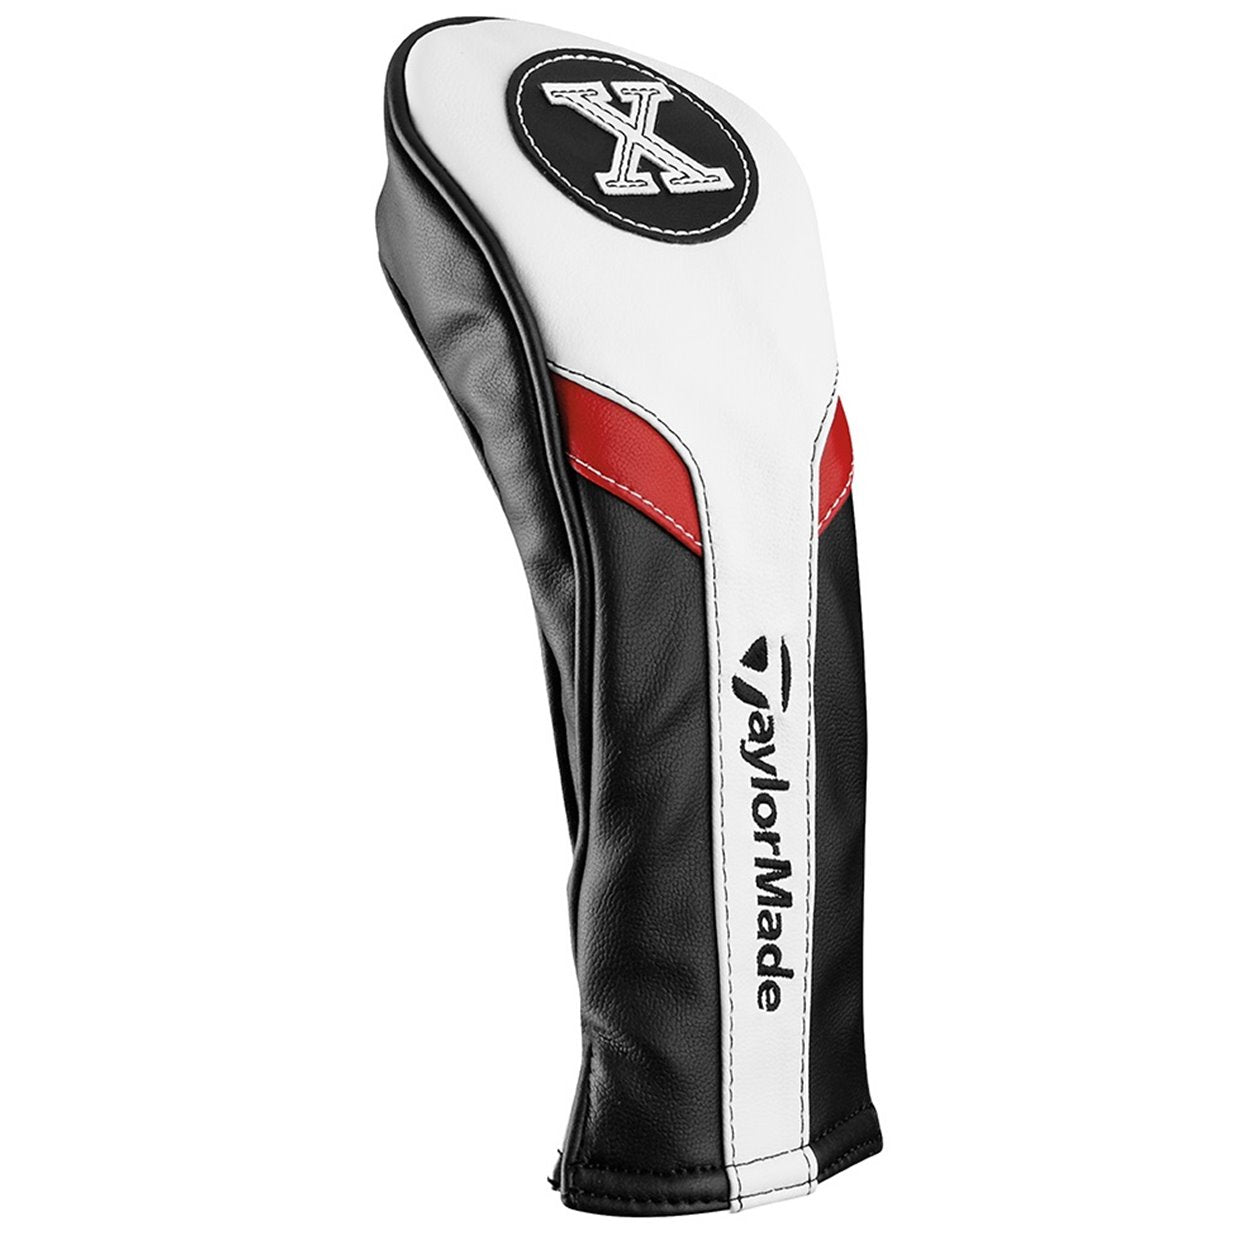 Taylormade 17 Hybrid Headcover